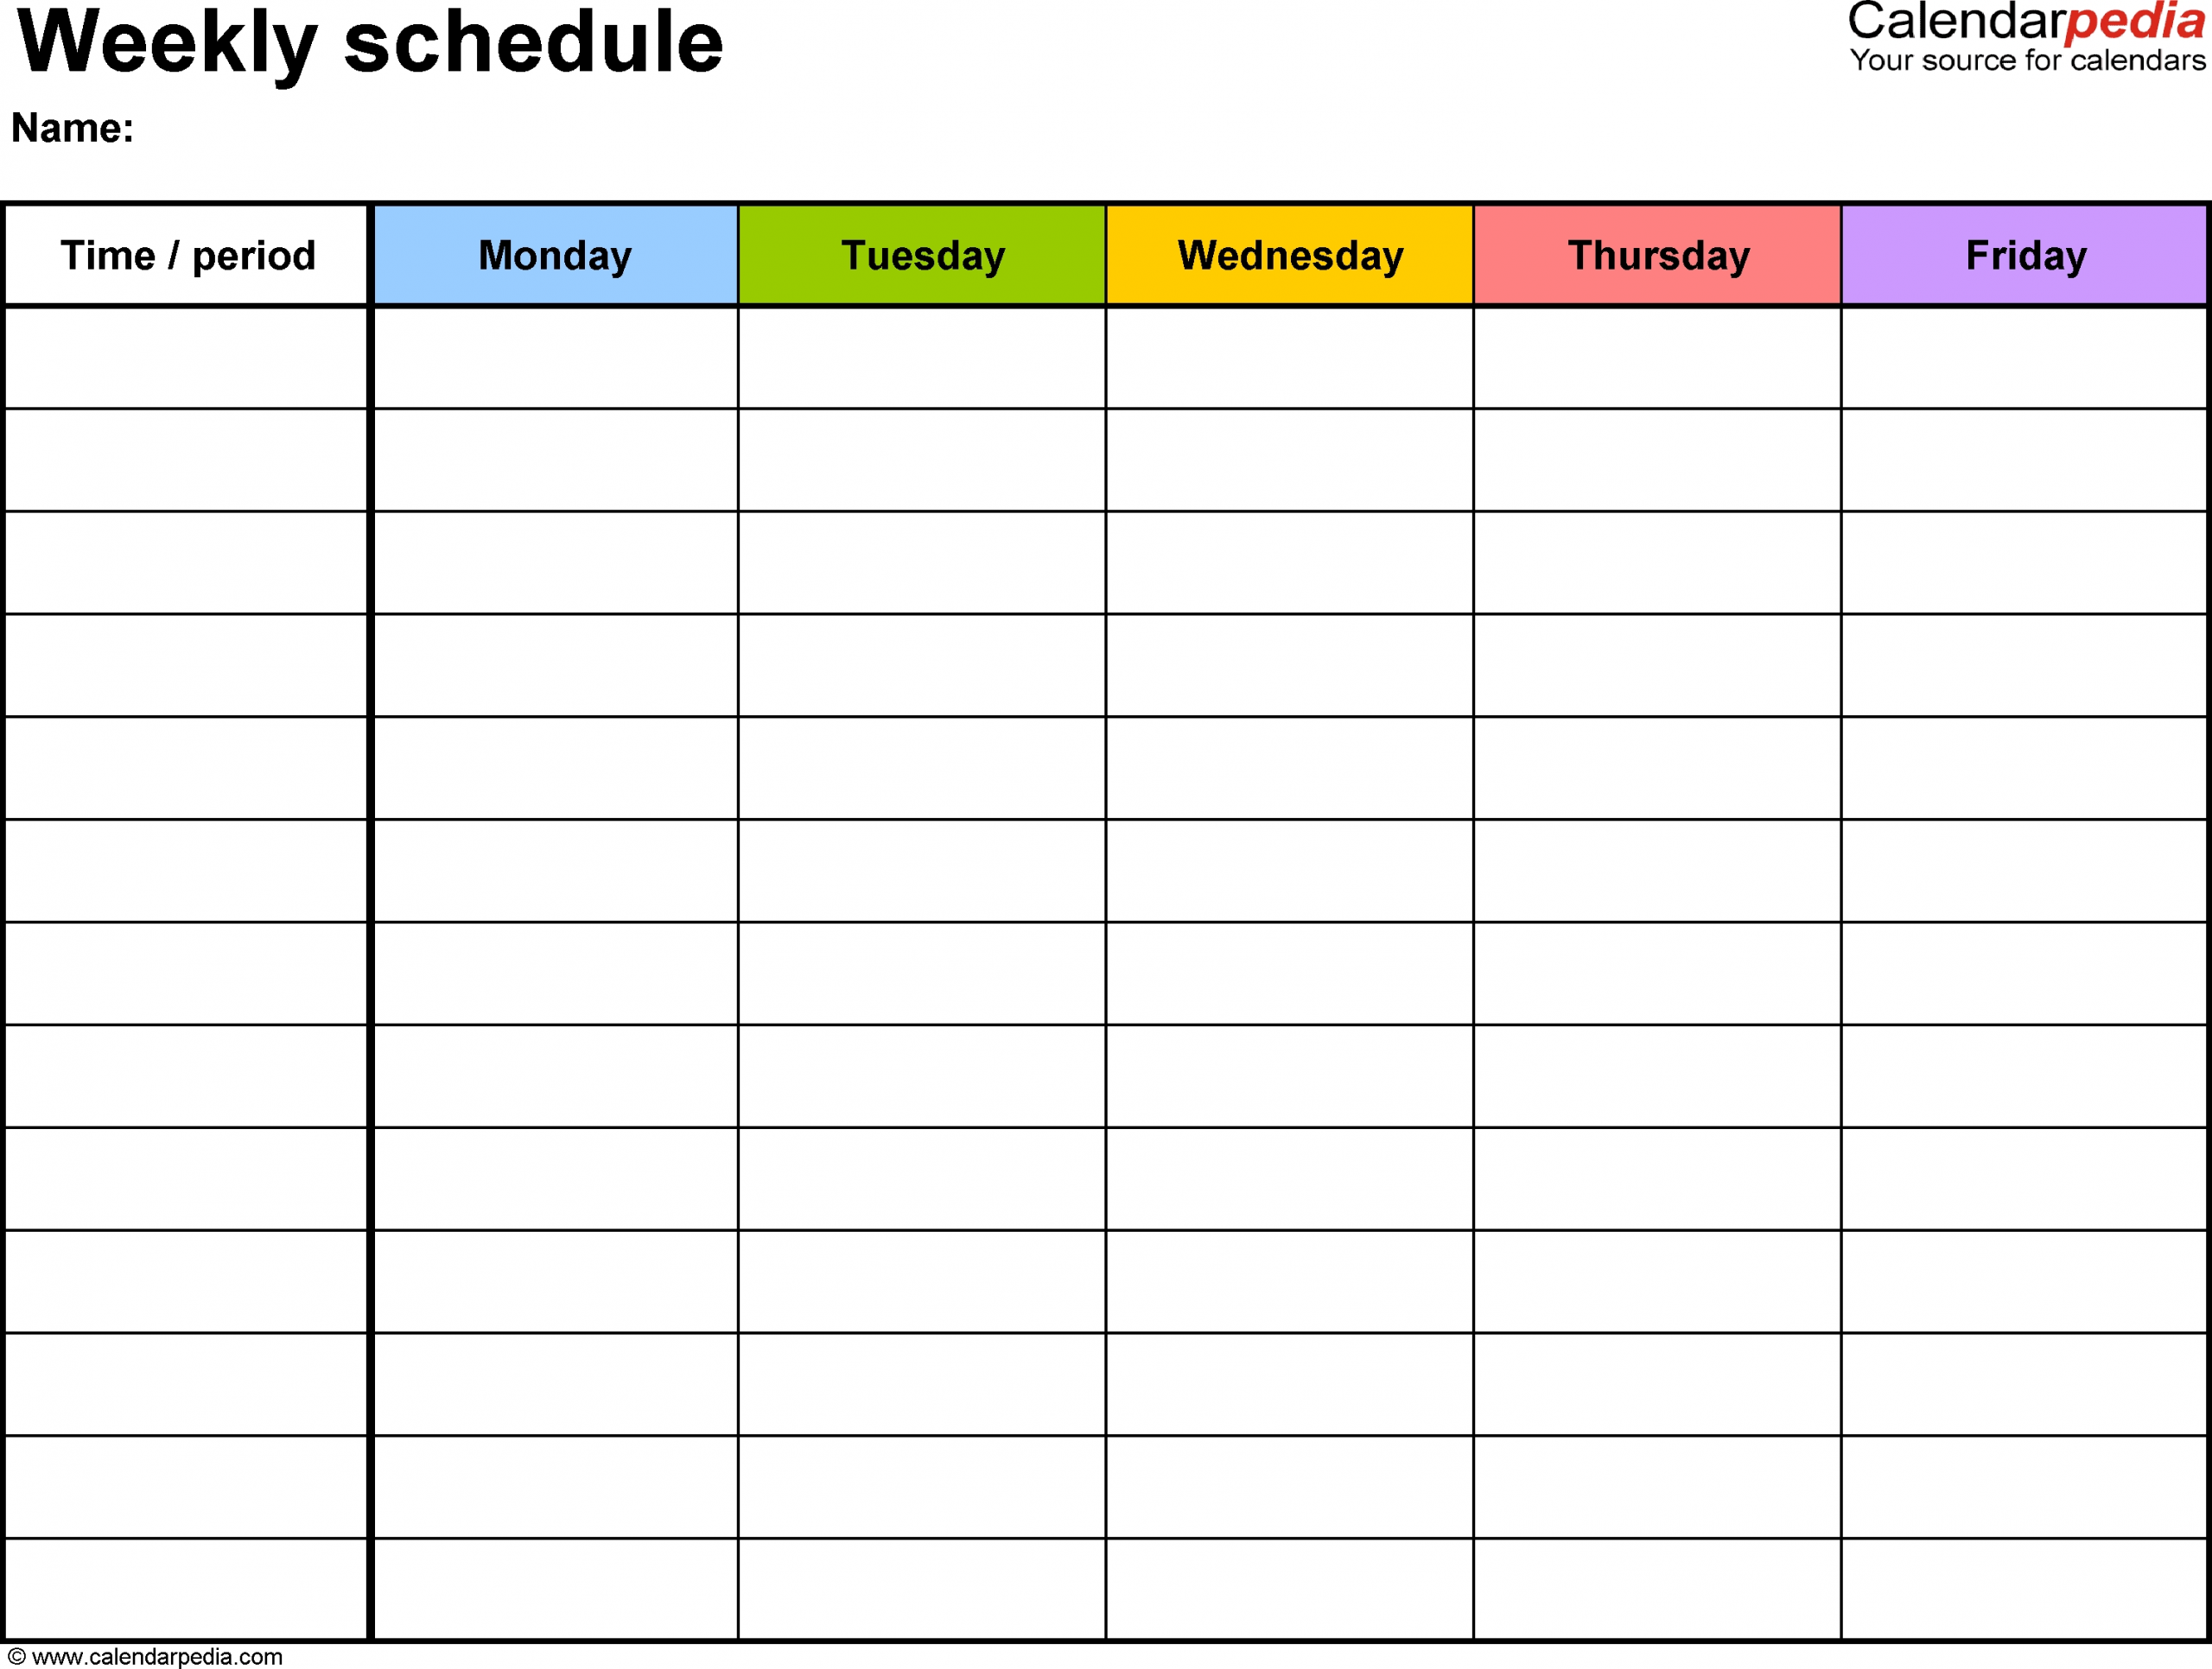 Free Weekly Schedule Templates For Word - 18 Templates for Monday Through Friday Calendar Template